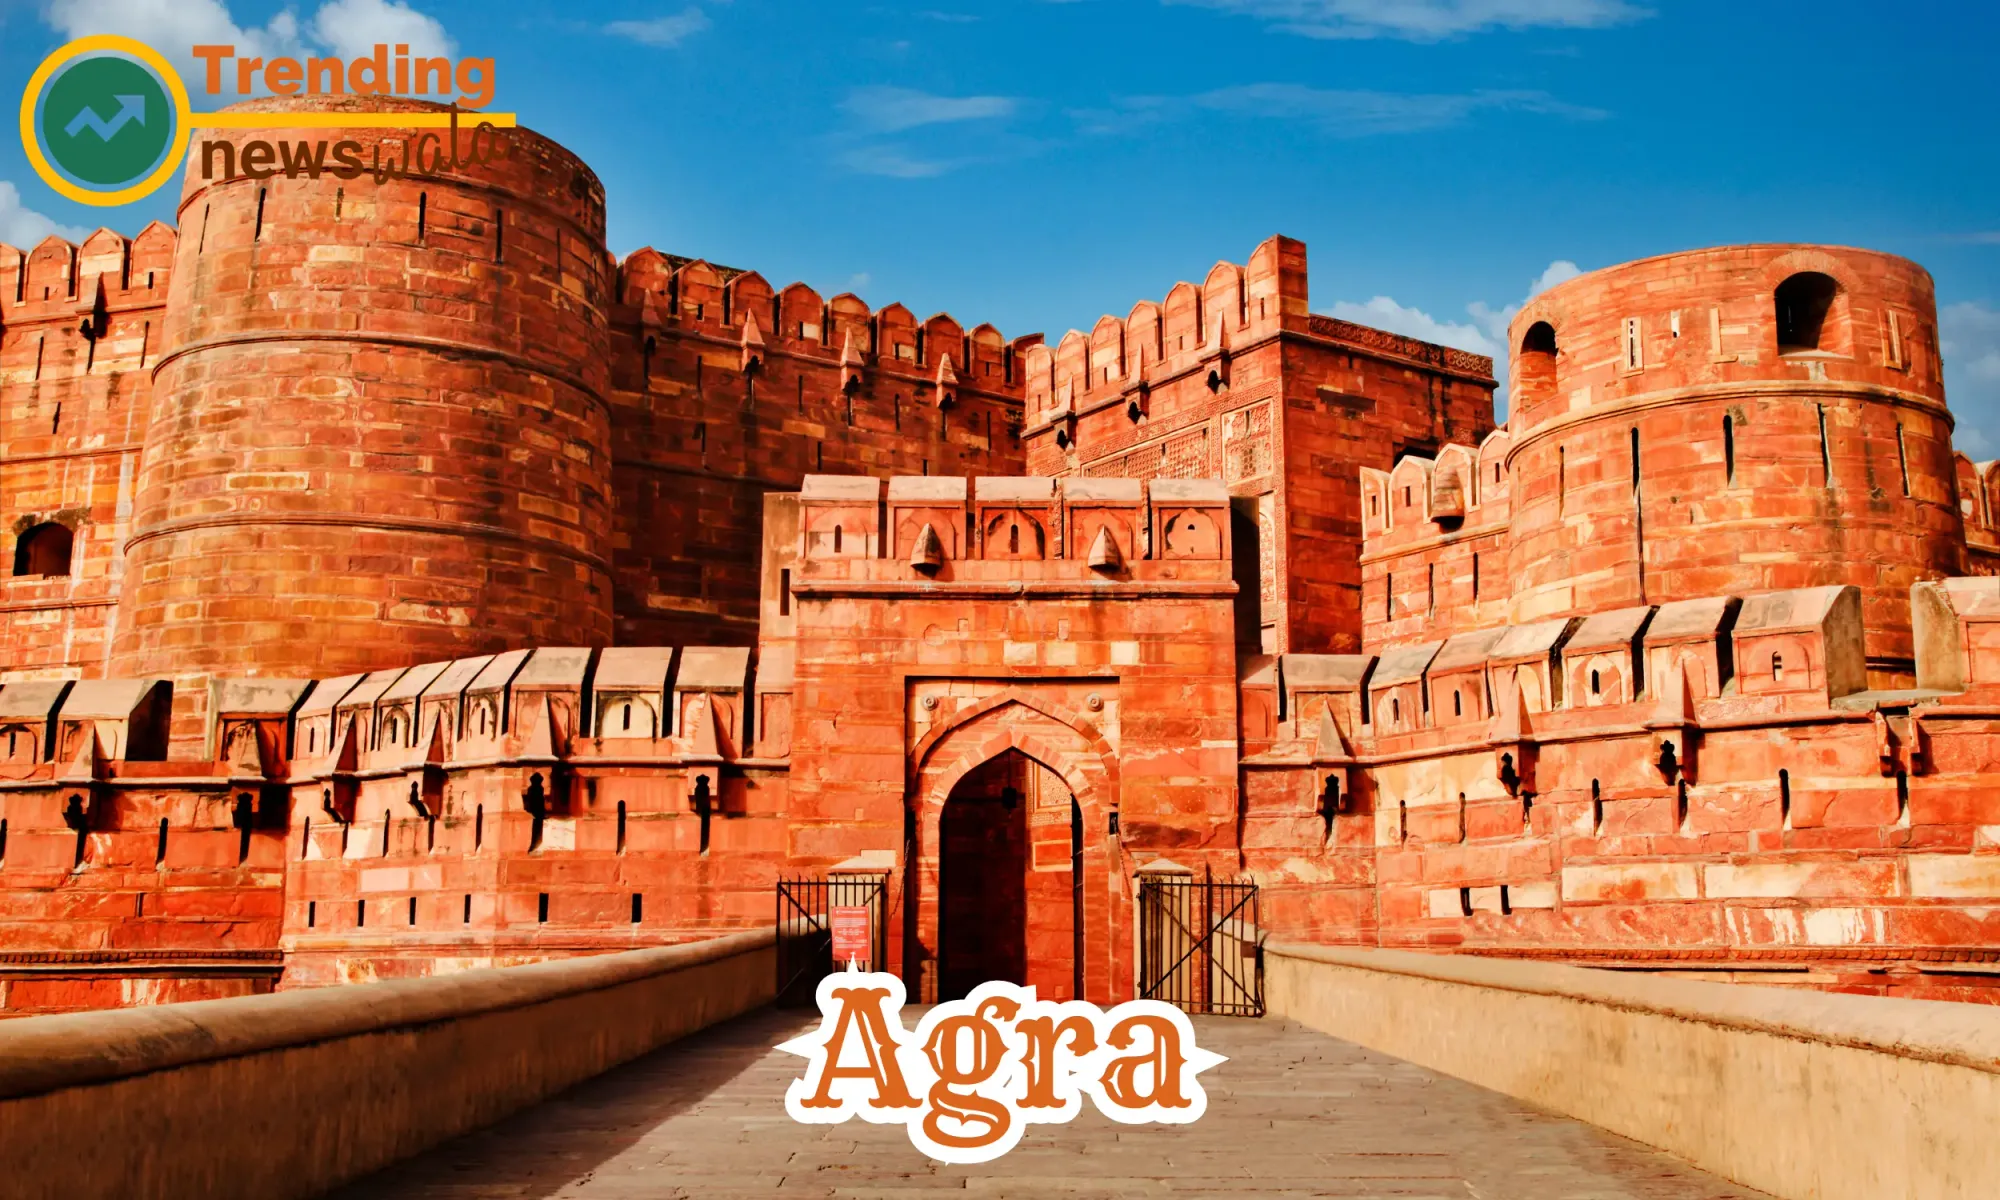 Agra, located in the northern Indian state of Uttar Pradesh